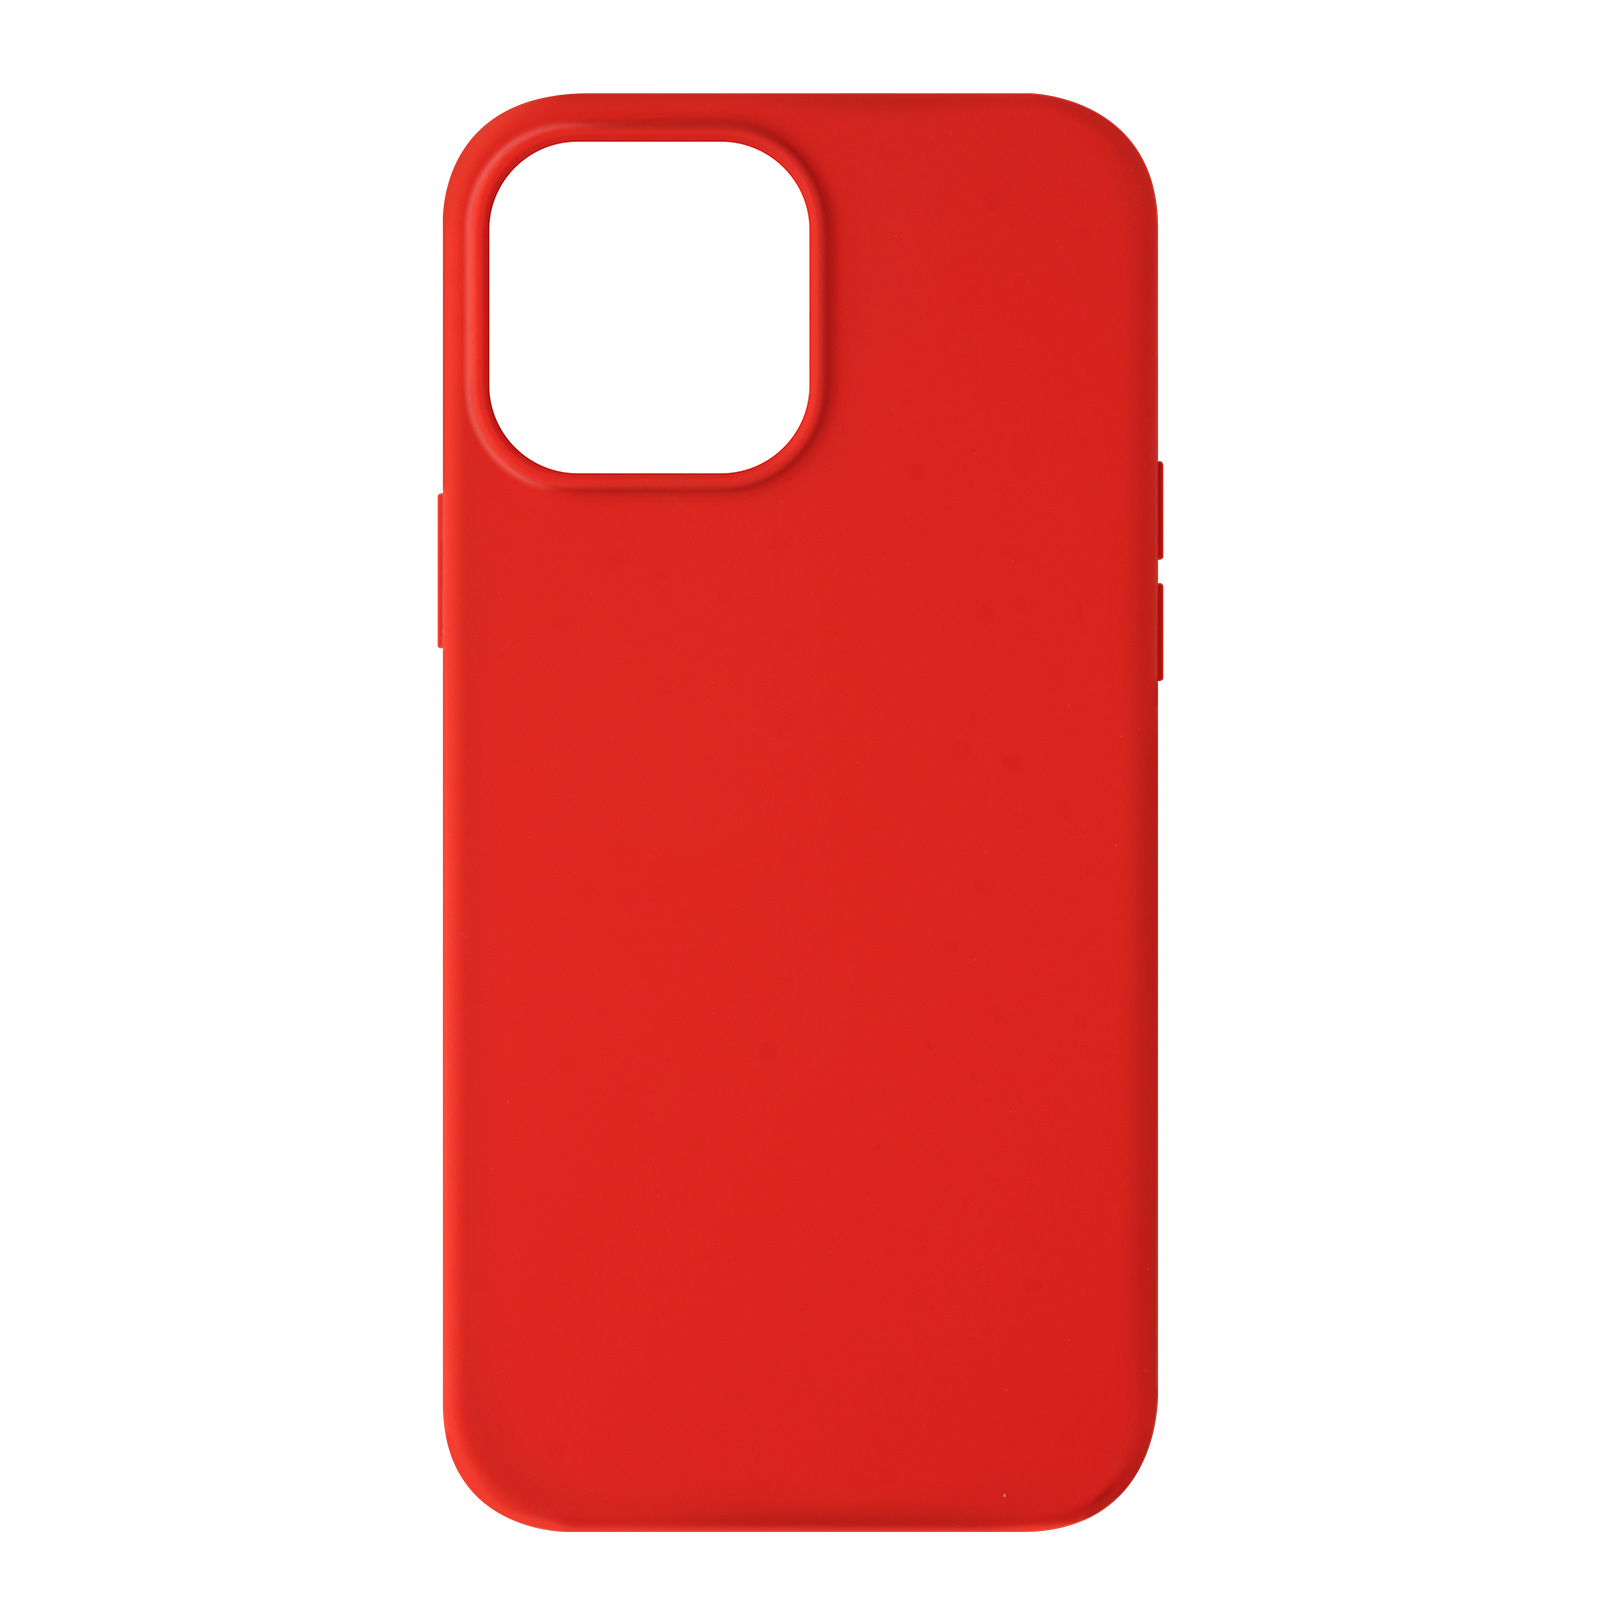 Rot Series, iPhone Likid Apple, AVIZAR Pro, 13 Backcover,